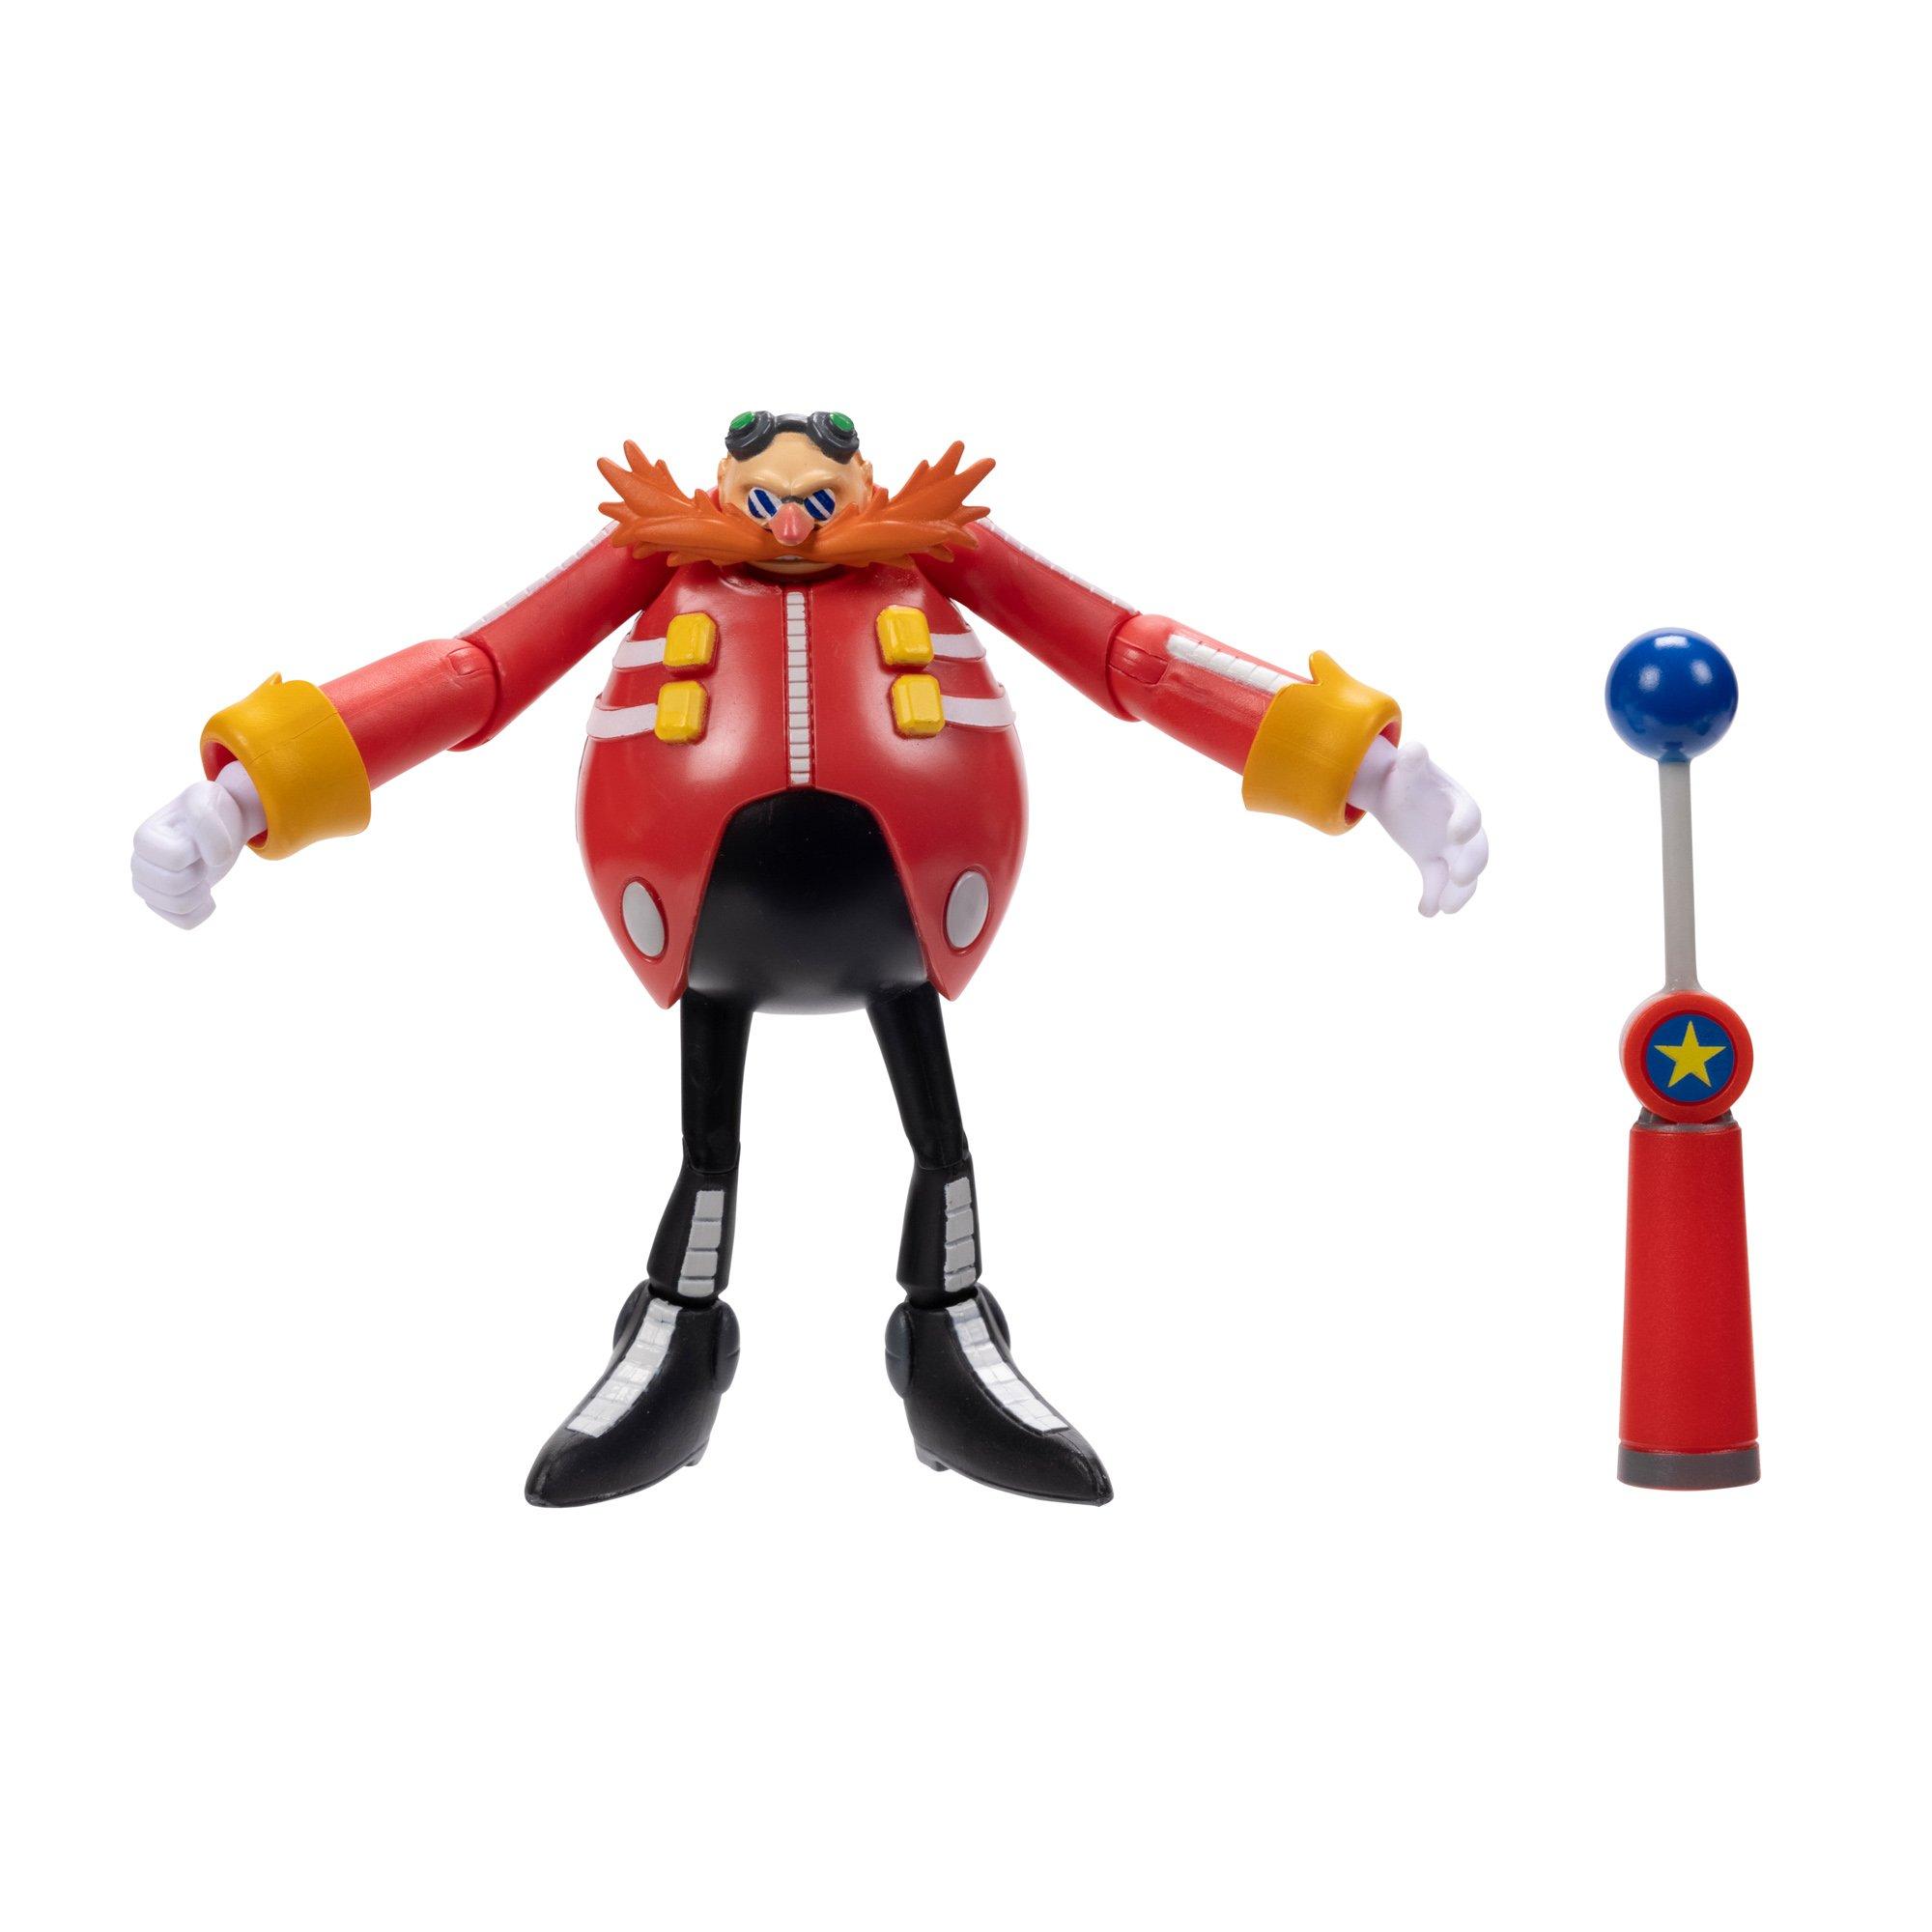 Jakks Pacific Sonic the Hedgehog Dr. Eggman with Fast Shoe Item Box 4-in Action Figure